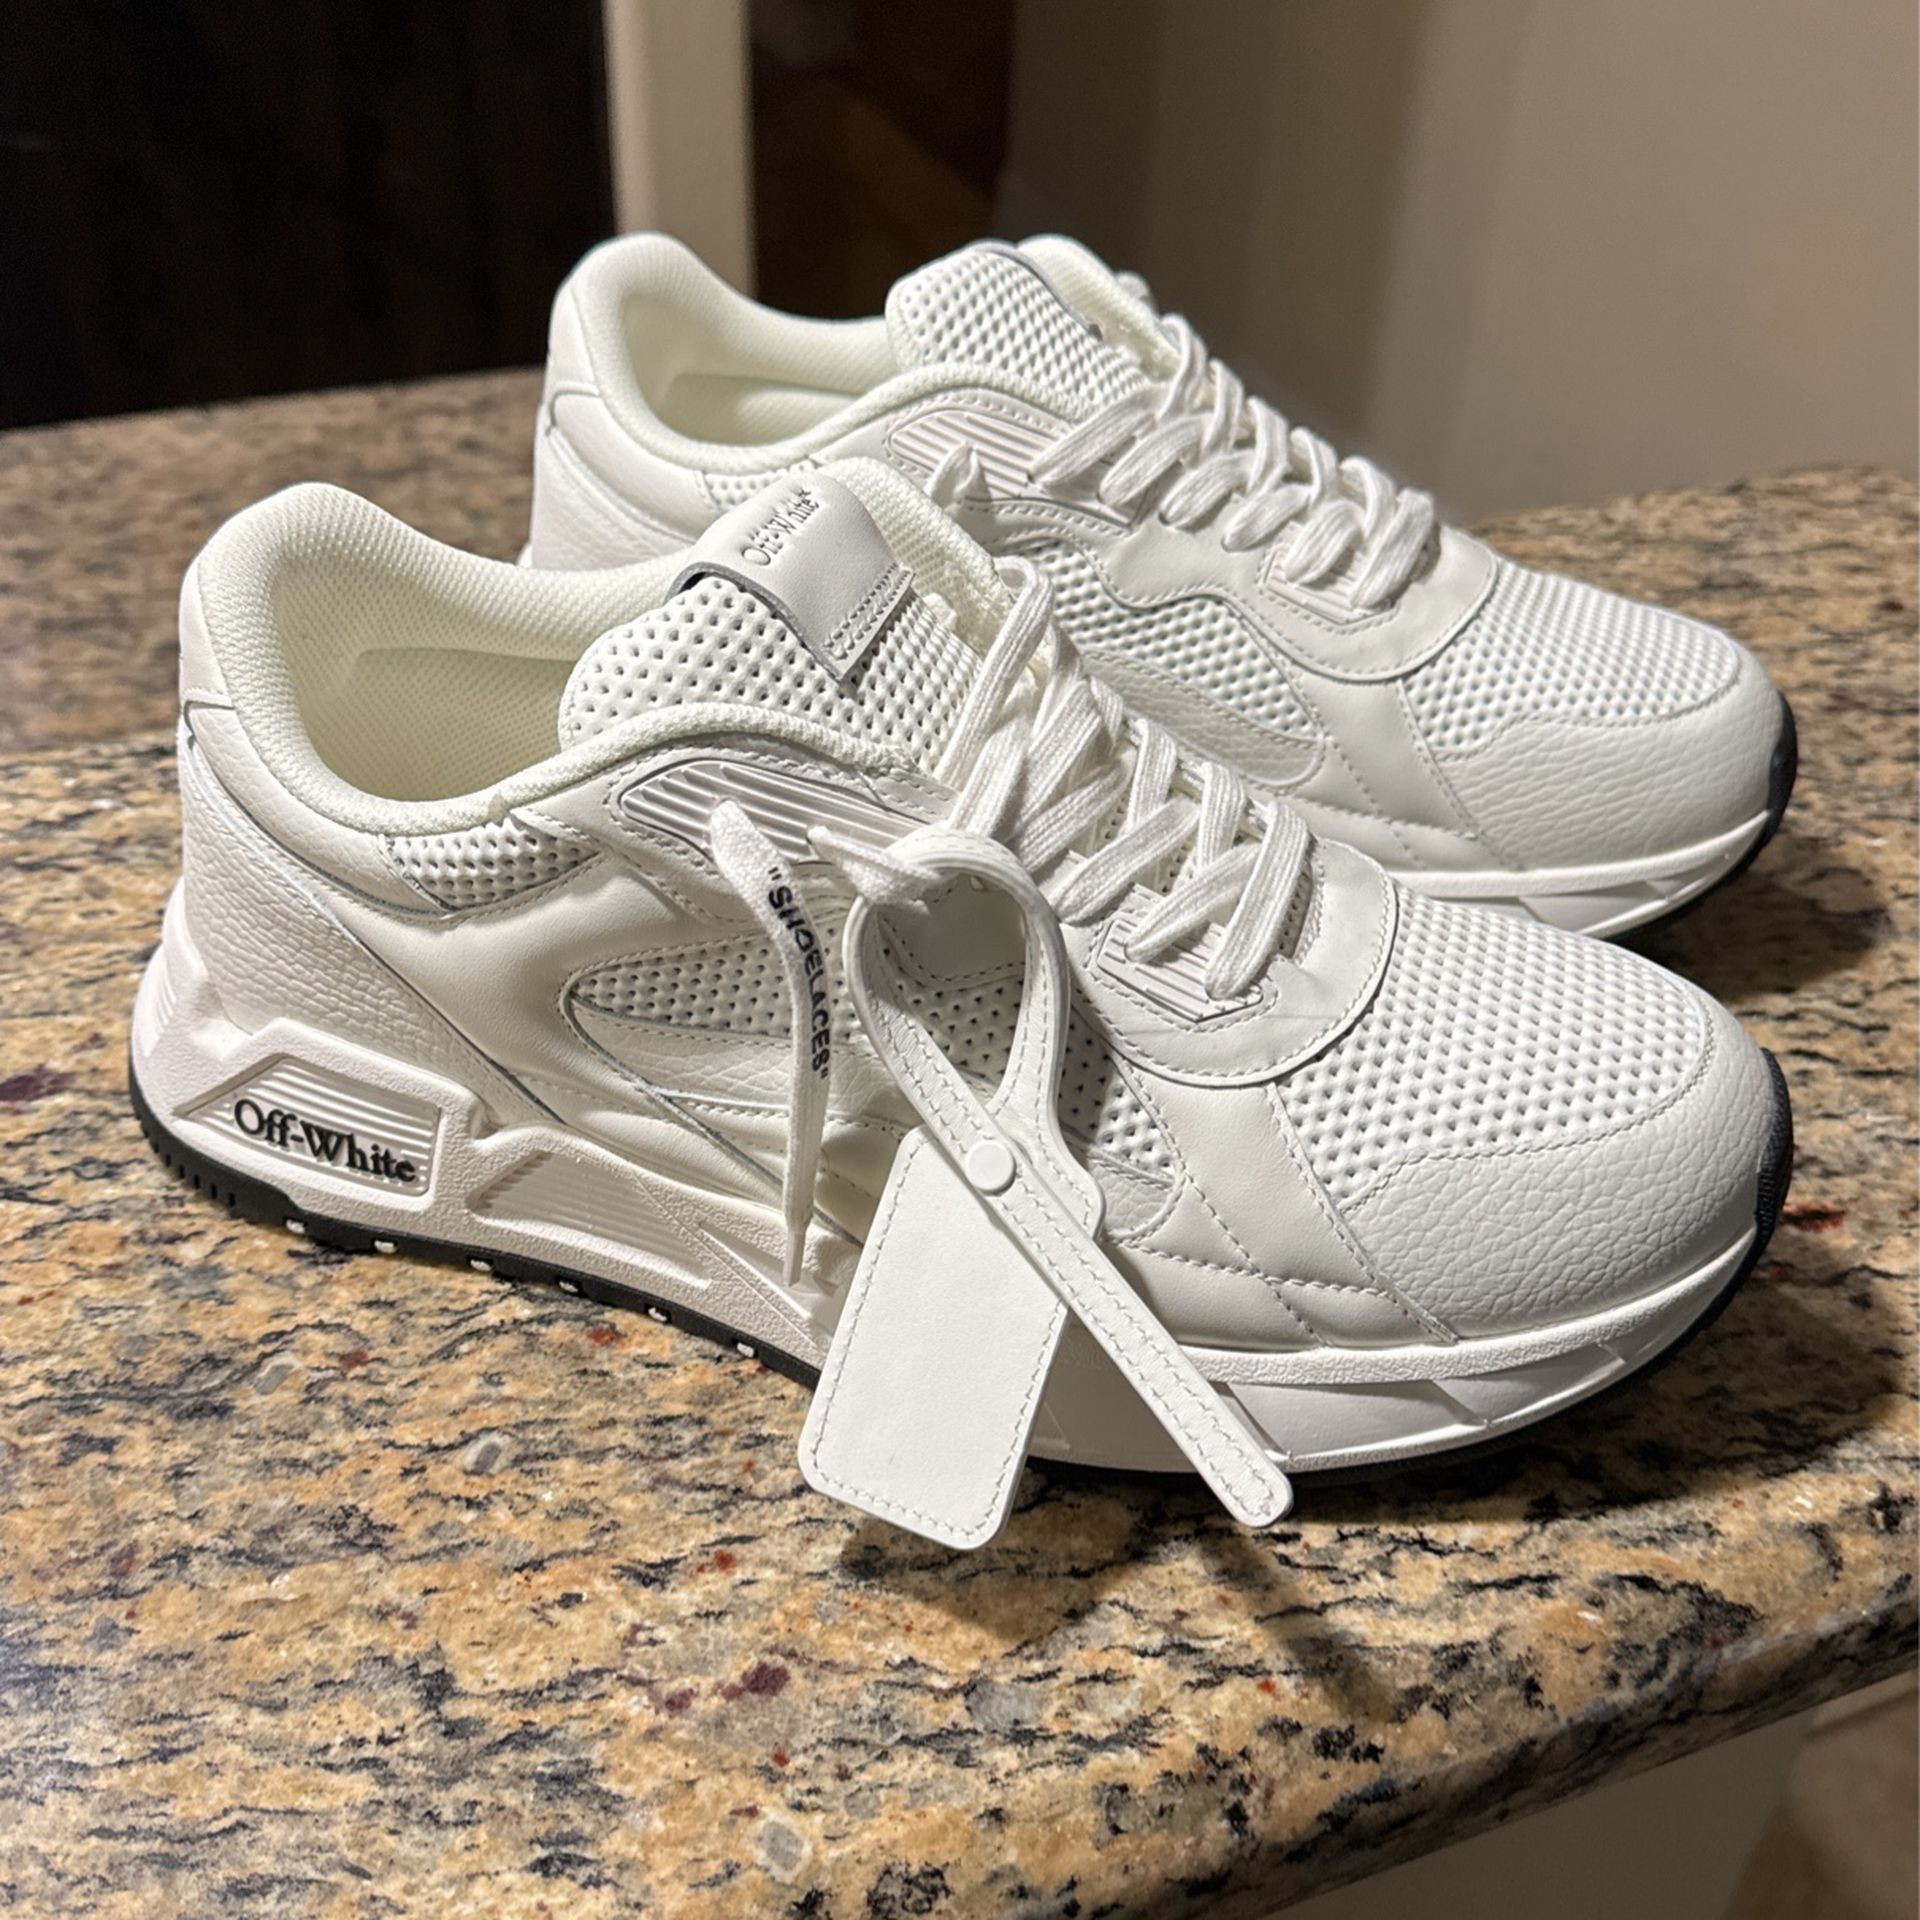 Off-White ( Runner B Perforated Leather Sneakers) 